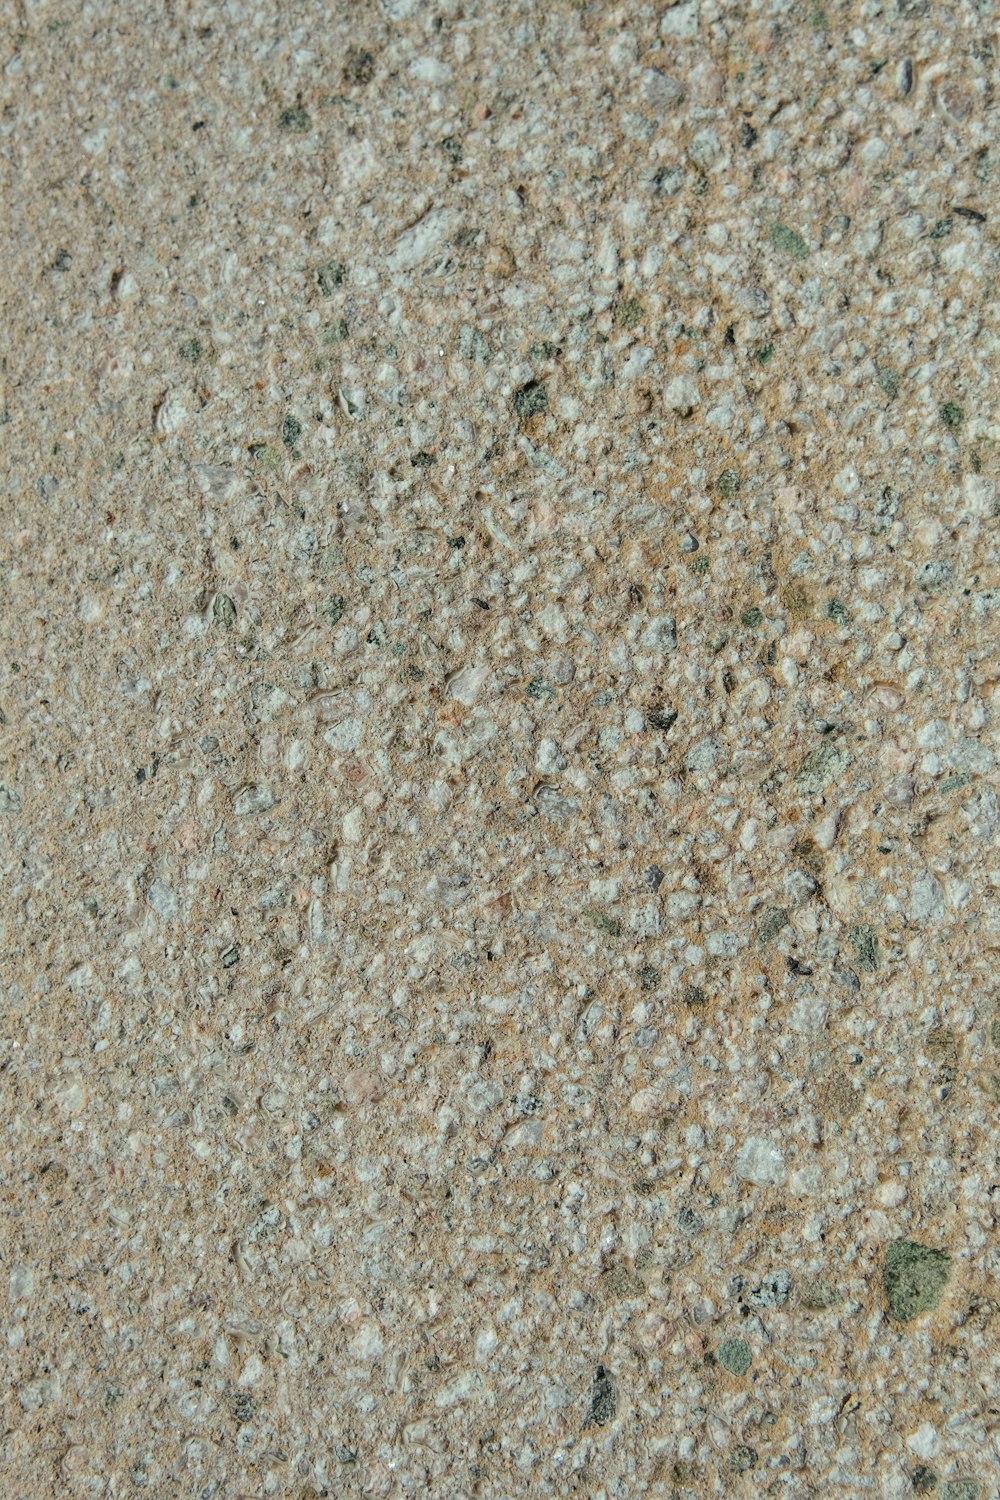 a close up of a stone surface with small rocks